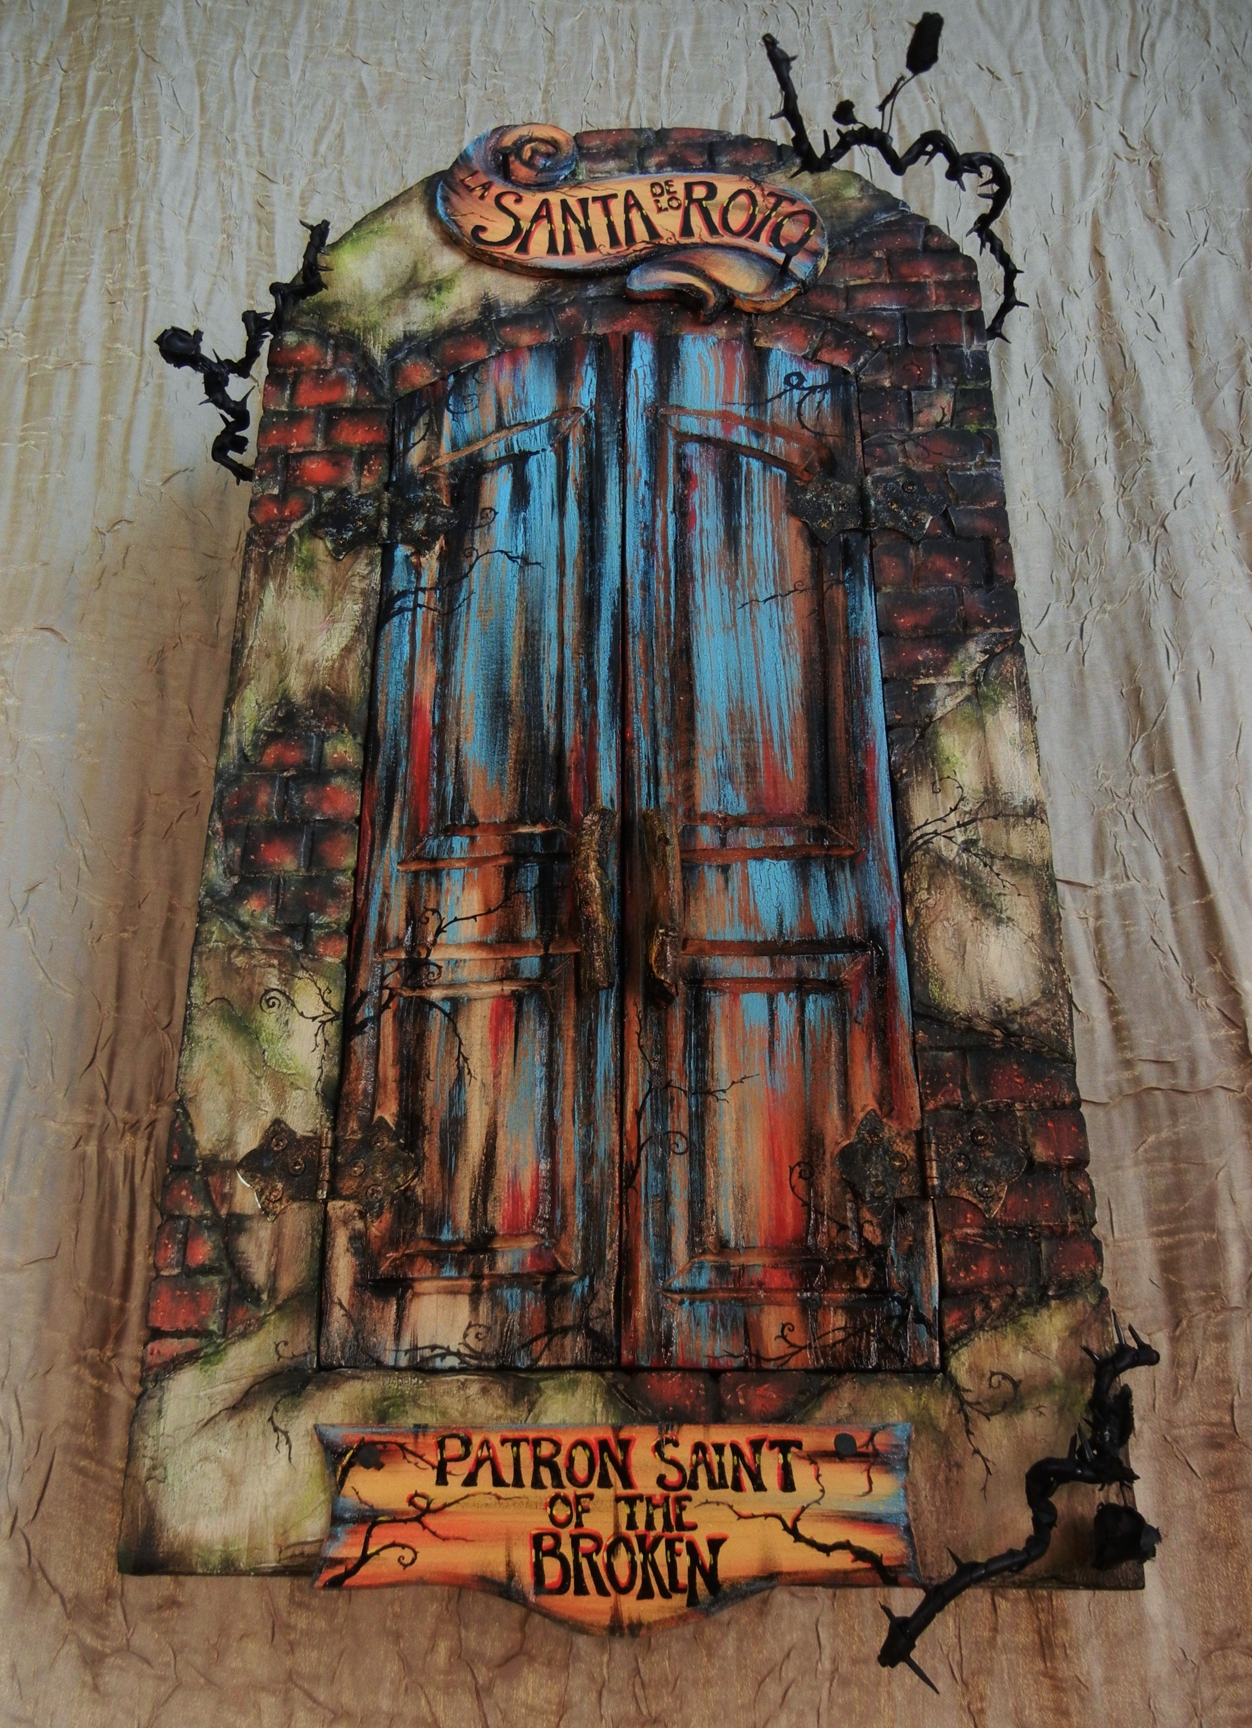 mixed media assemblage art box cabinet with painted doors closed reads Patron Saint of the Broken